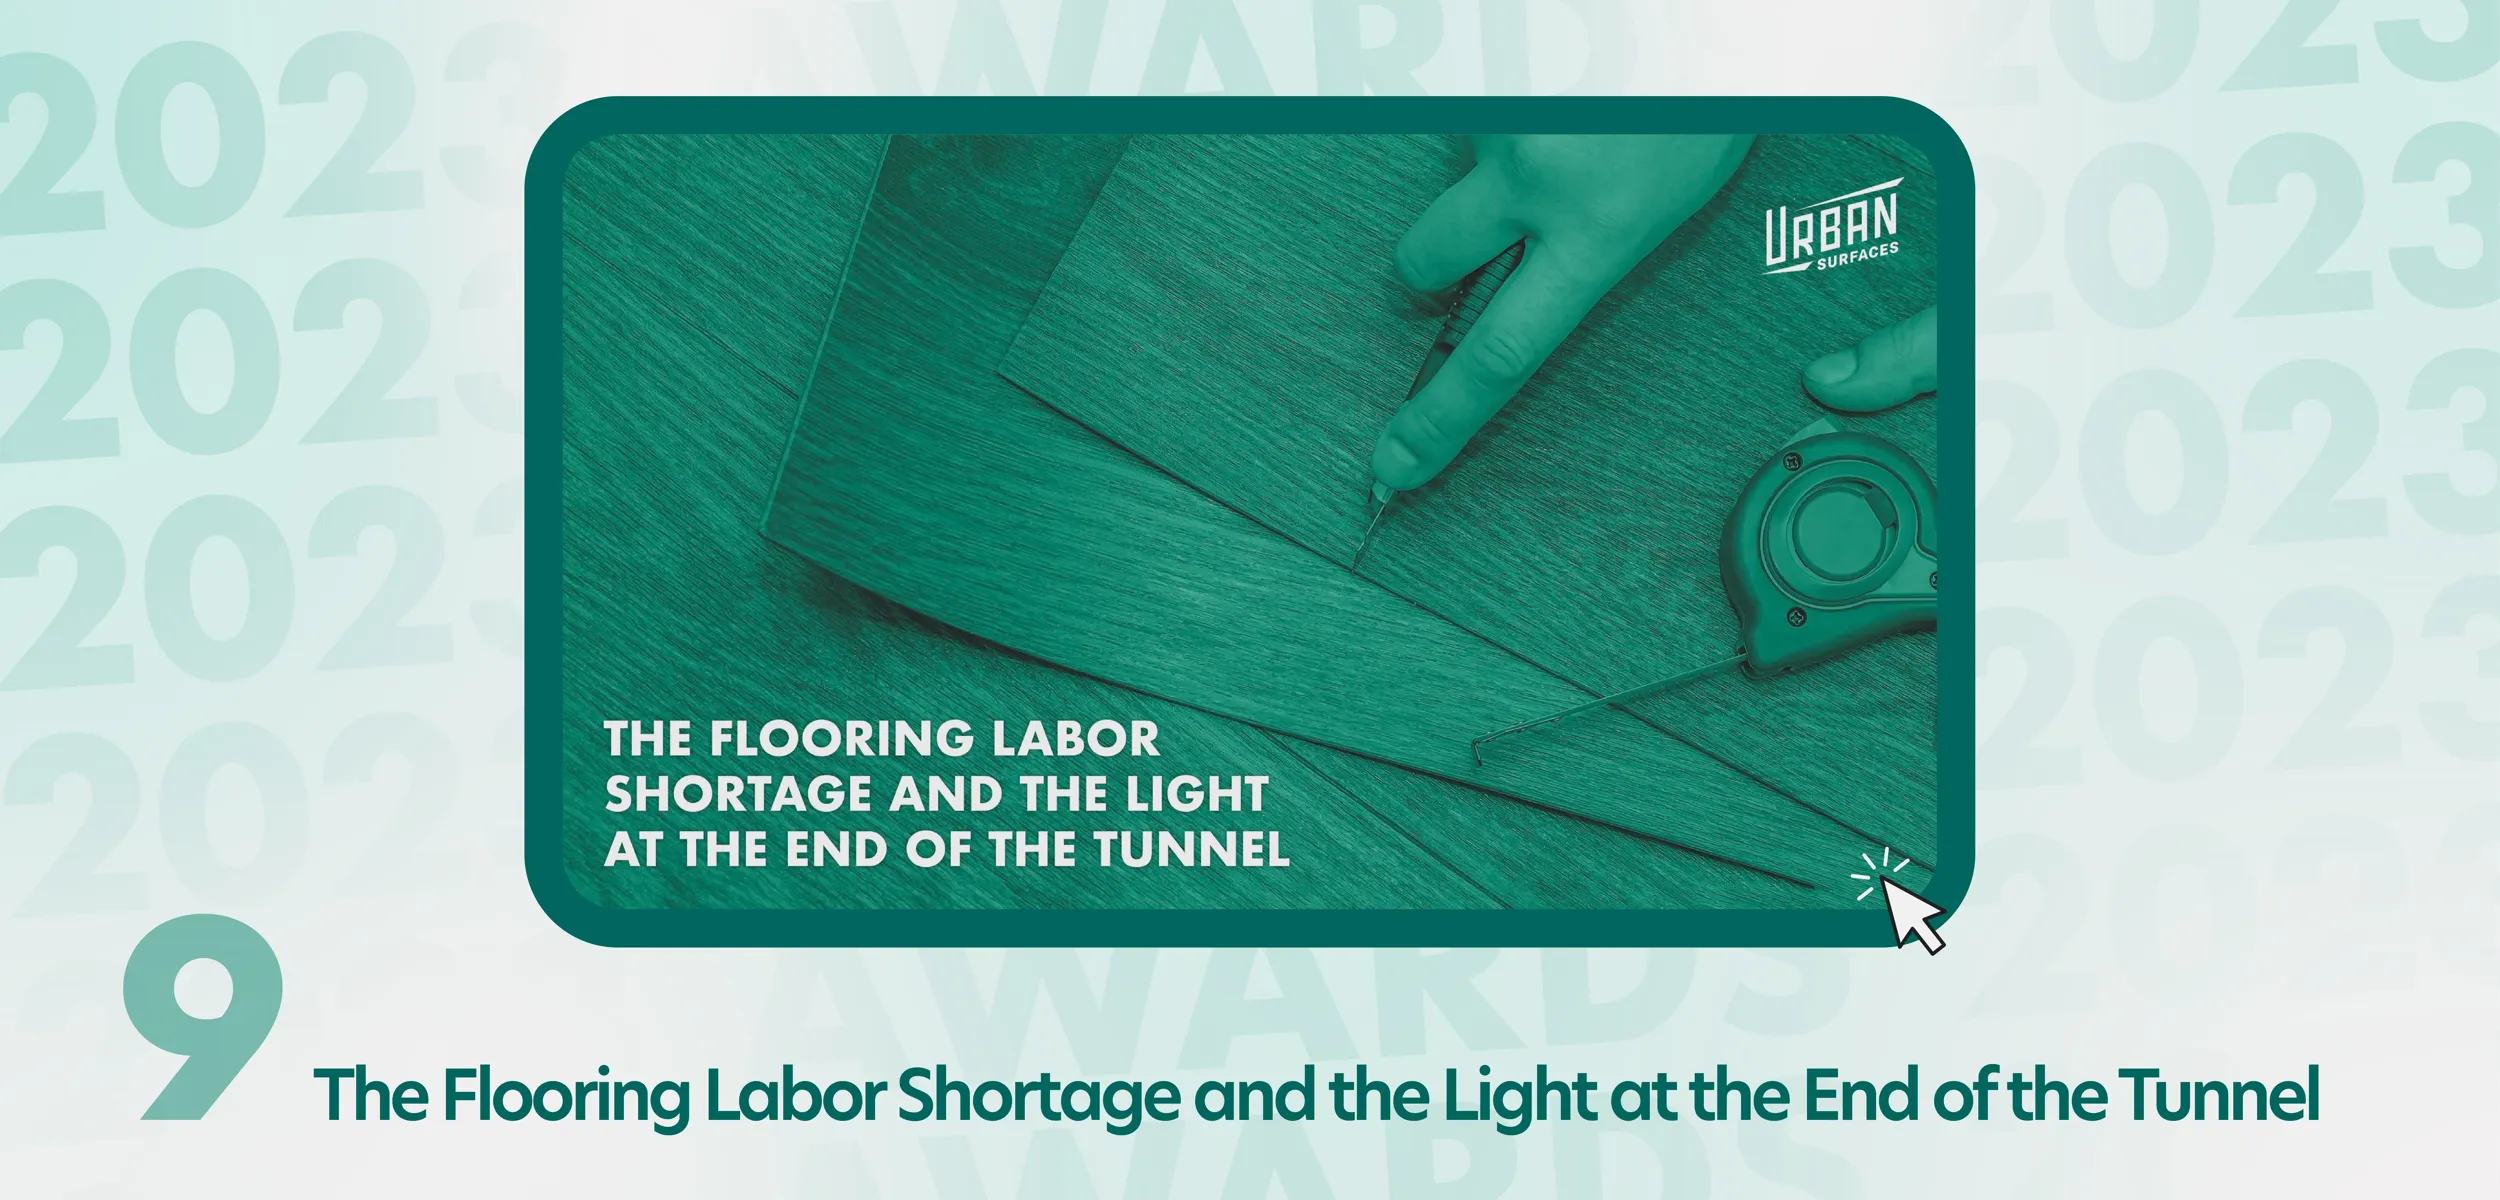 Image of flooring planks being measured and cut. Title: The Flooring Labor Shortage and the Light at the End of the Tunnel.